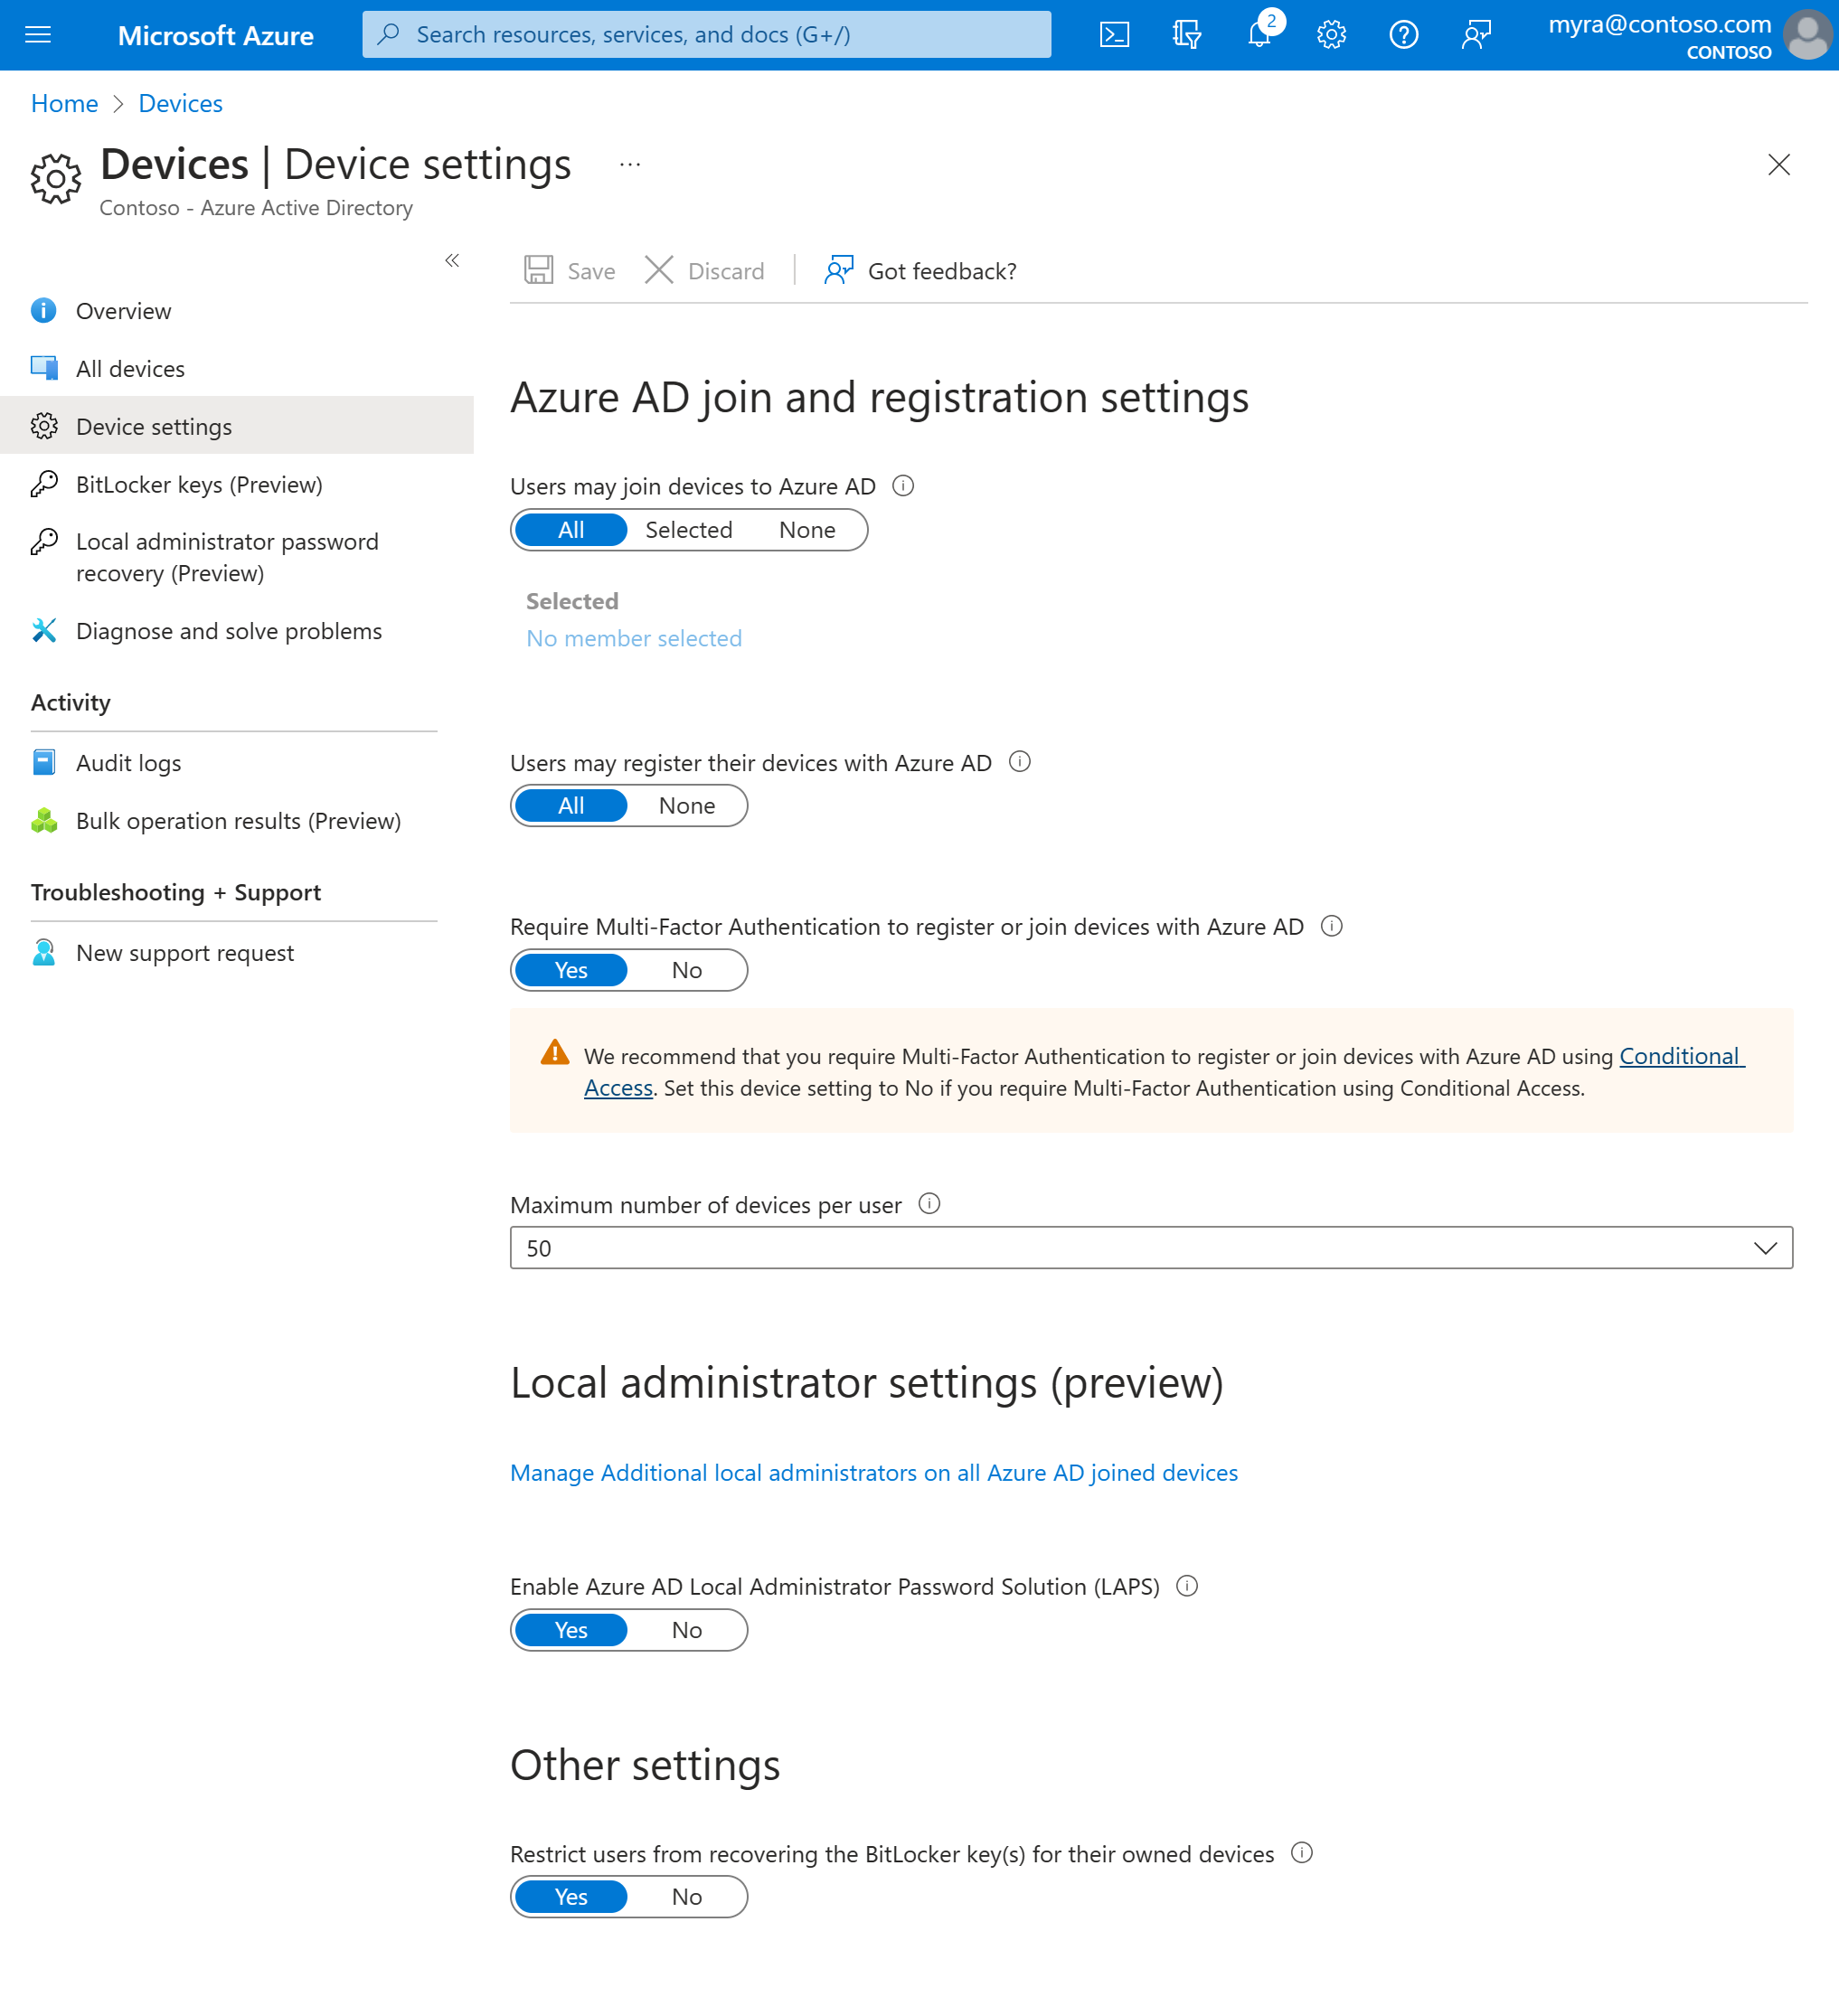 Screenshot that shows device settings related to Azure AD.